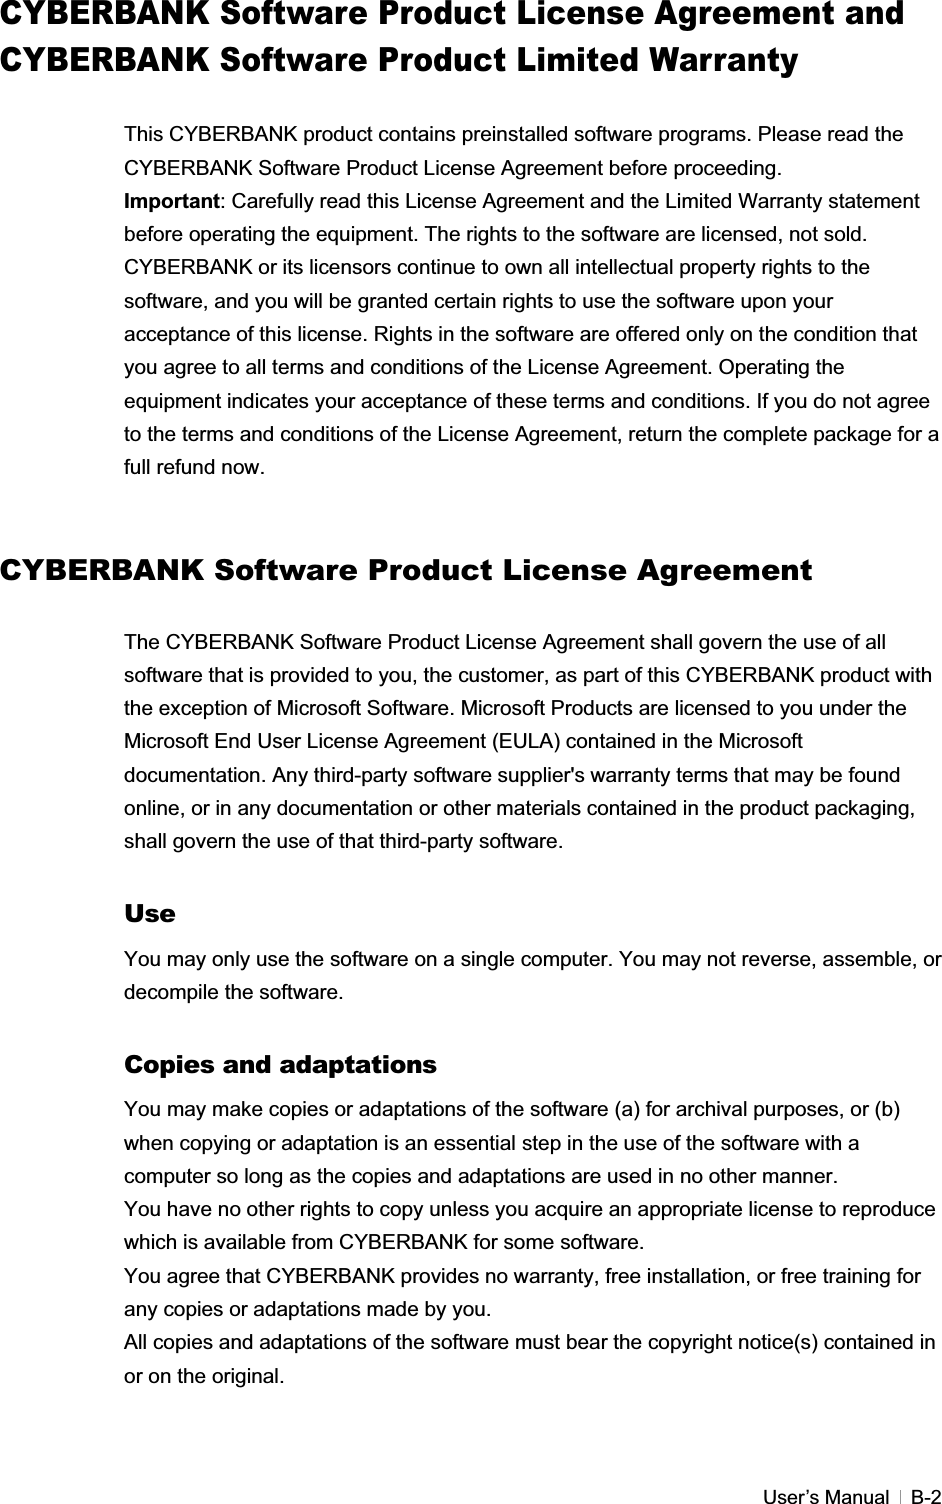 GUser’s Manual   B-2CYBERBANK Software Product License Agreement and CYBERBANK Software Product Limited Warranty This CYBERBANK product contains preinstalled software programs. Please read the CYBERBANK Software Product License Agreement before proceeding. Important: Carefully read this License Agreement and the Limited Warranty statement before operating the equipment. The rights to the software are licensed, not sold. CYBERBANK or its licensors continue to own all intellectual property rights to the software, and you will be granted certain rights to use the software upon your acceptance of this license. Rights in the software are offered only on the condition that you agree to all terms and conditions of the License Agreement. Operating the equipment indicates your acceptance of these terms and conditions. If you do not agree to the terms and conditions of the License Agreement, return the complete package for a full refund now. CYBERBANK Software Product License AgreementThe CYBERBANK Software Product License Agreement shall govern the use of all software that is provided to you, the customer, as part of this CYBERBANK product with the exception of Microsoft Software. Microsoft Products are licensed to you under the Microsoft End User License Agreement (EULA) contained in the Microsoft documentation. Any third-party software supplier&apos;s warranty terms that may be found online, or in any documentation or other materials contained in the product packaging, shall govern the use of that third-party software. UseYou may only use the software on a single computer. You may not reverse, assemble, or decompile the software. Copies and adaptations You may make copies or adaptations of the software (a) for archival purposes, or (b) when copying or adaptation is an essential step in the use of the software with a computer so long as the copies and adaptations are used in no other manner. You have no other rights to copy unless you acquire an appropriate license to reproduce which is available from CYBERBANK for some software. You agree that CYBERBANK provides no warranty, free installation, or free training for any copies or adaptations made by you. All copies and adaptations of the software must bear the copyright notice(s) contained in or on the original. 